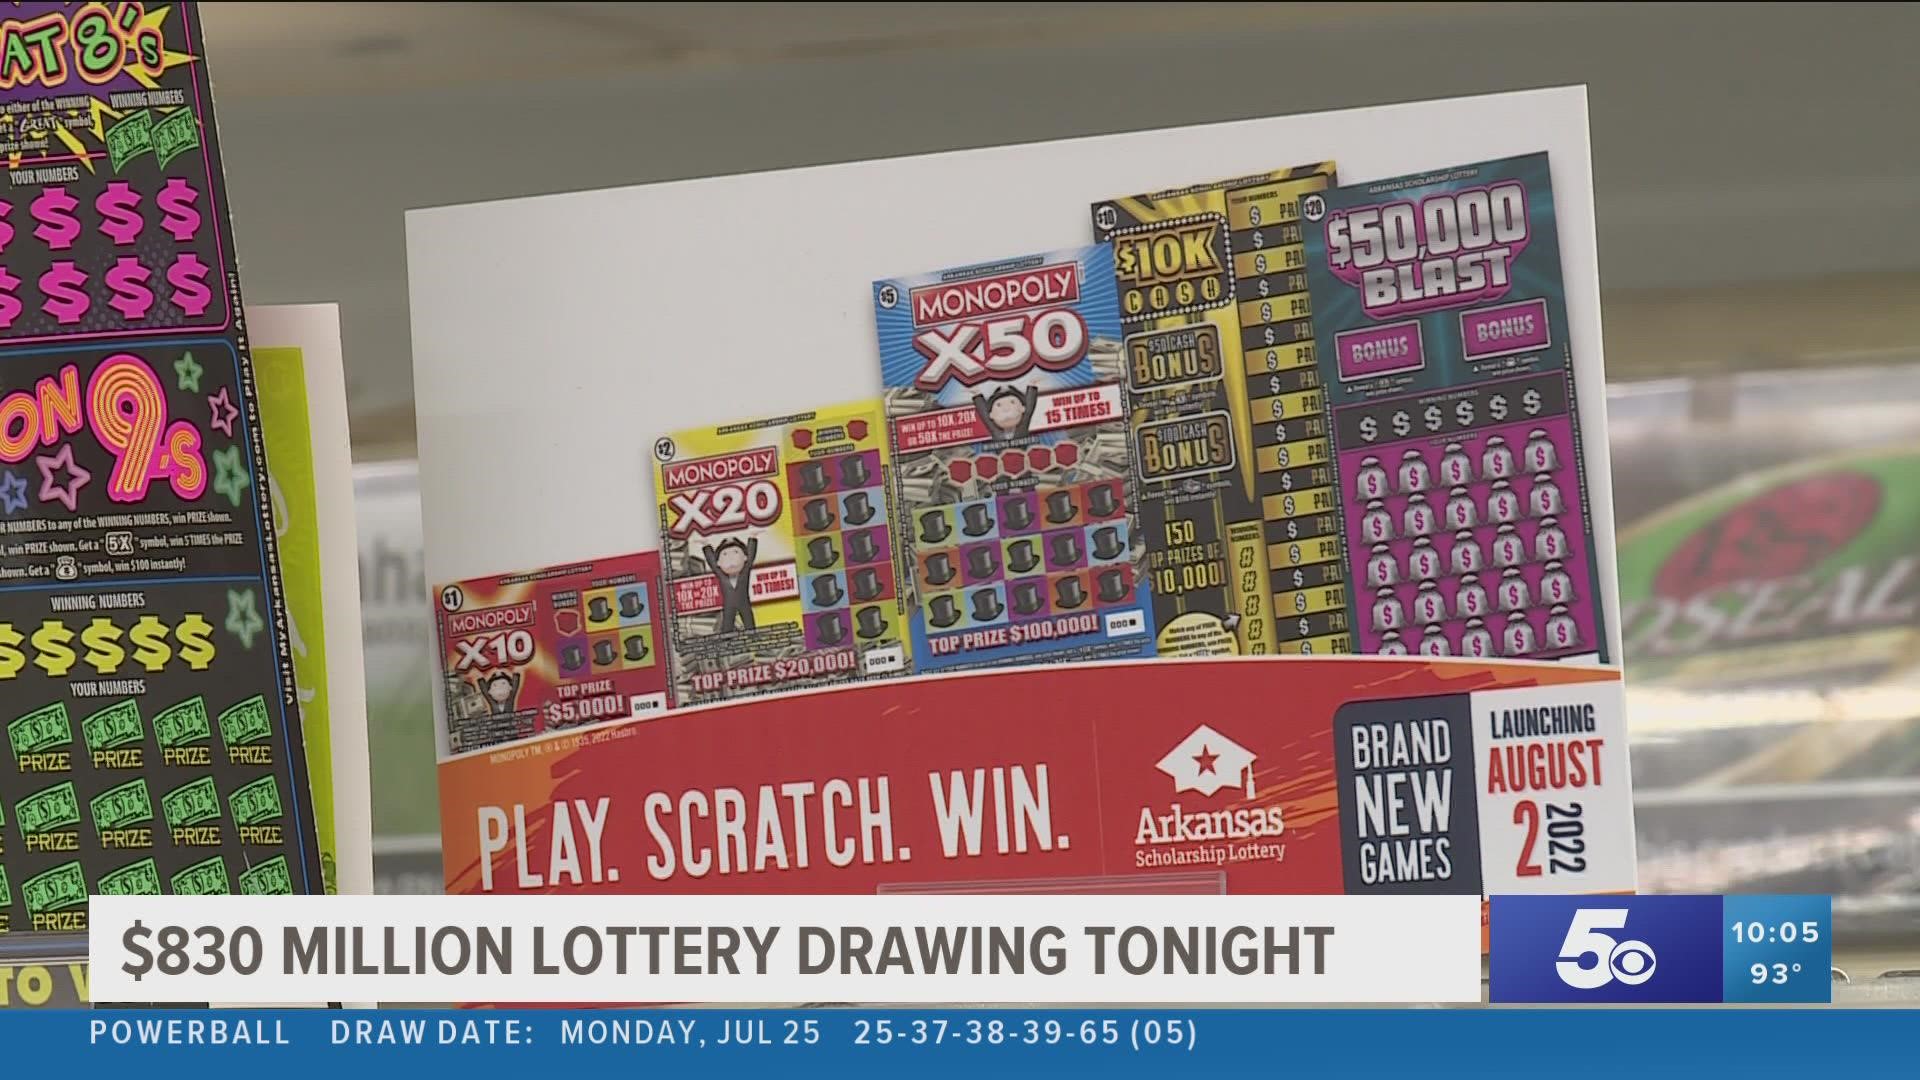 With the $830 million lottery drawing taking place, Arkansans were buying tickets with excitement with the possibility of winning the fortune.